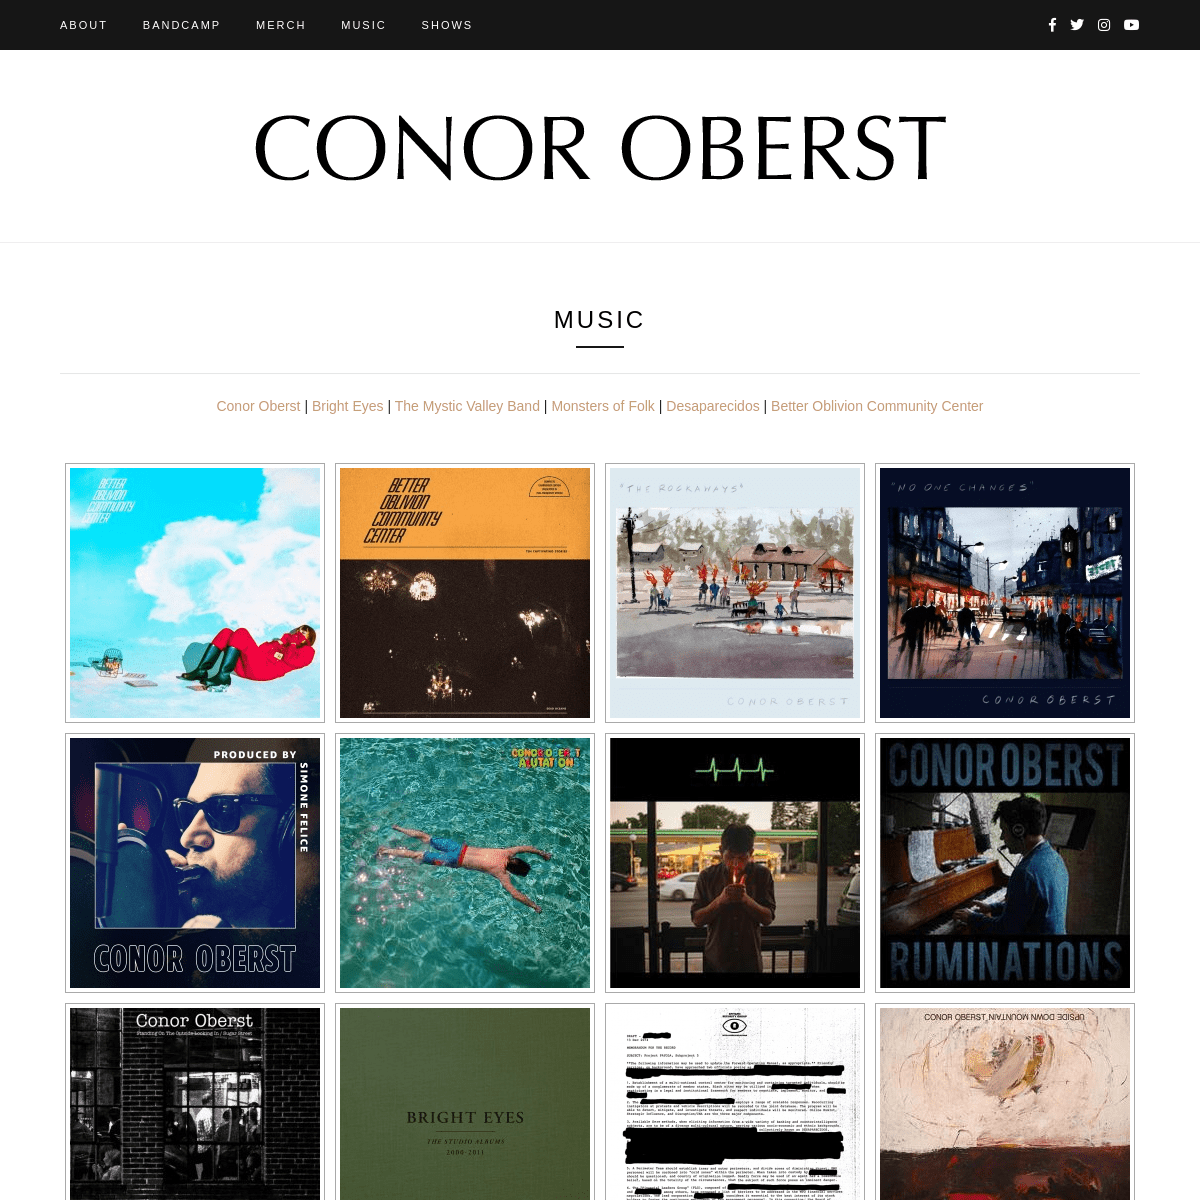 A complete backup of conoroberst.com